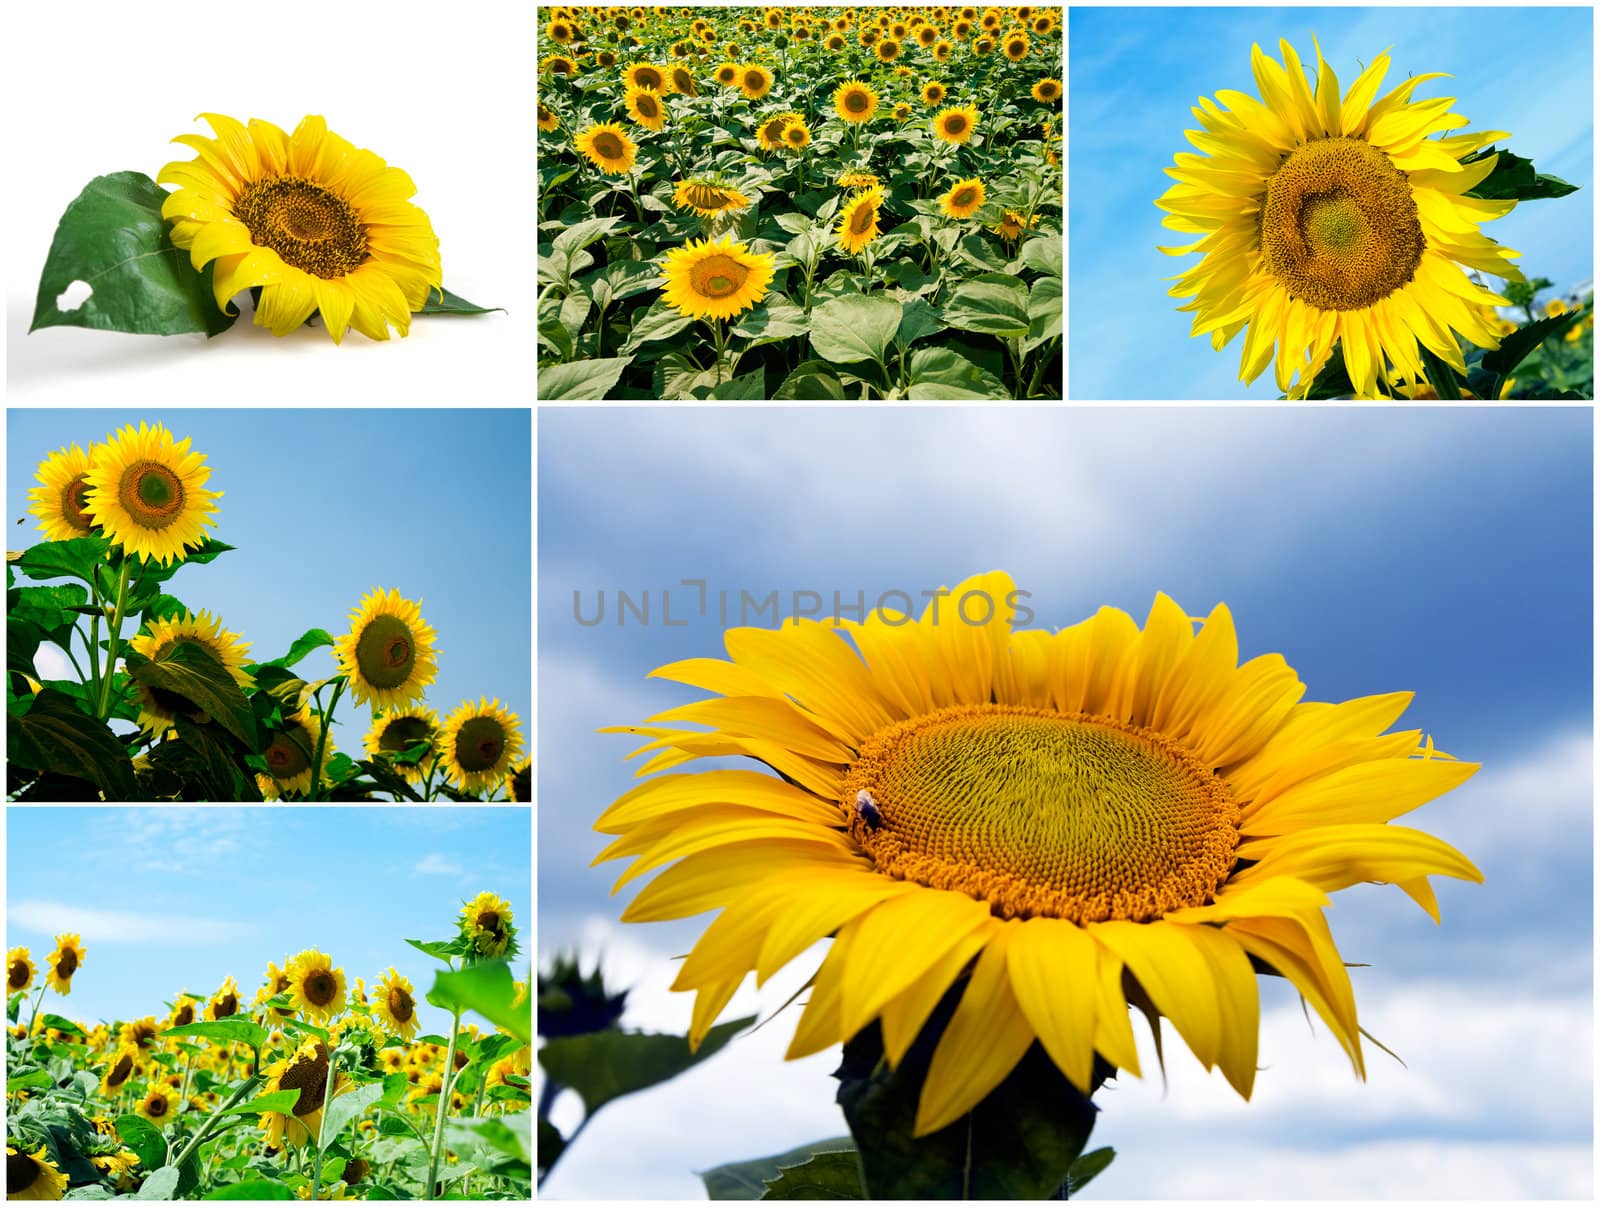 Bright sunflowers against the blue sky in summer day by Serp